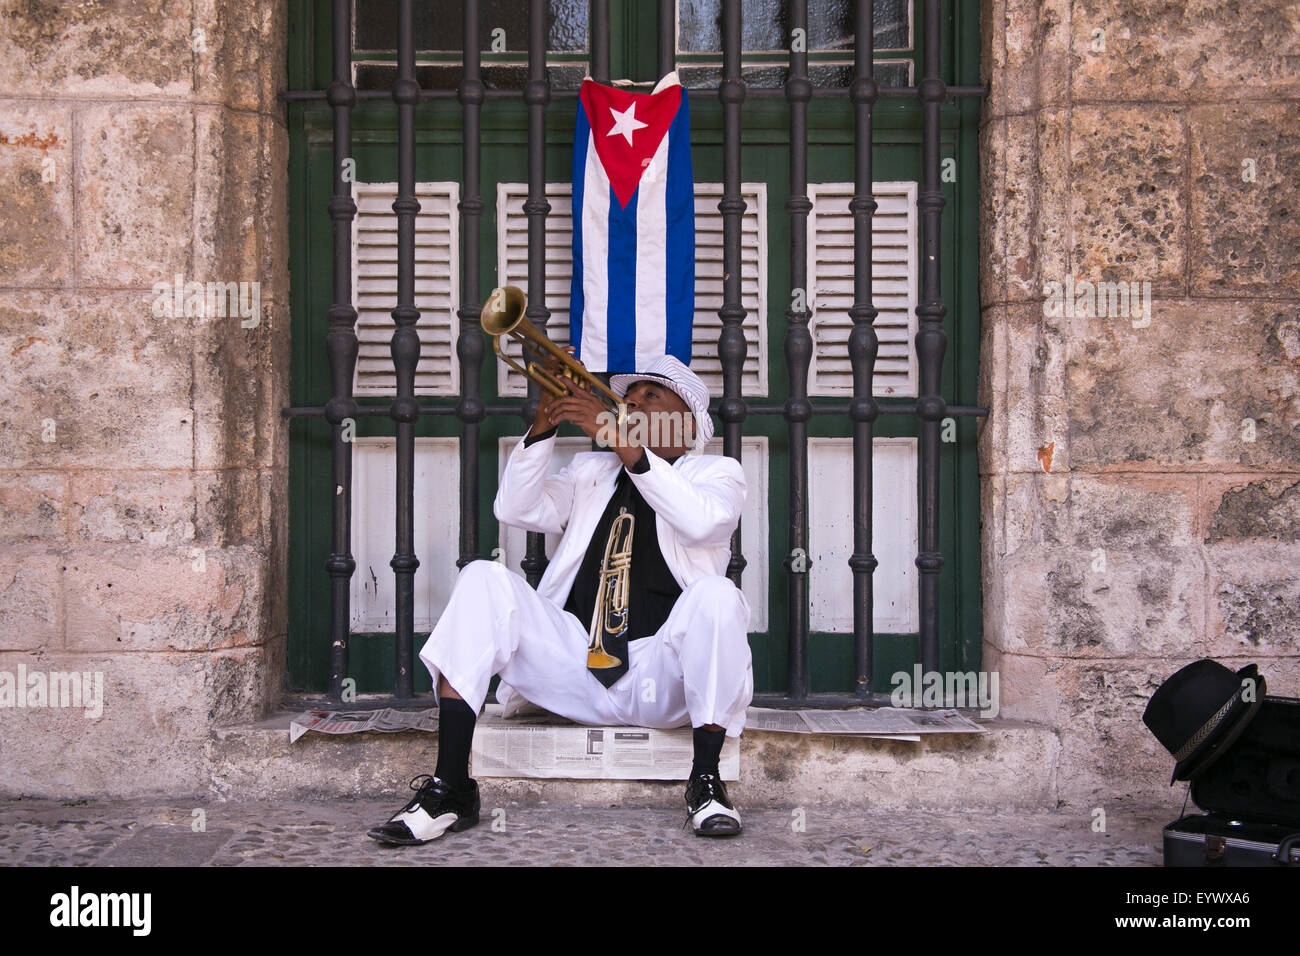 A man playing a trumpet in Army Plaza in Old Havana, Cuba. Stock Photo